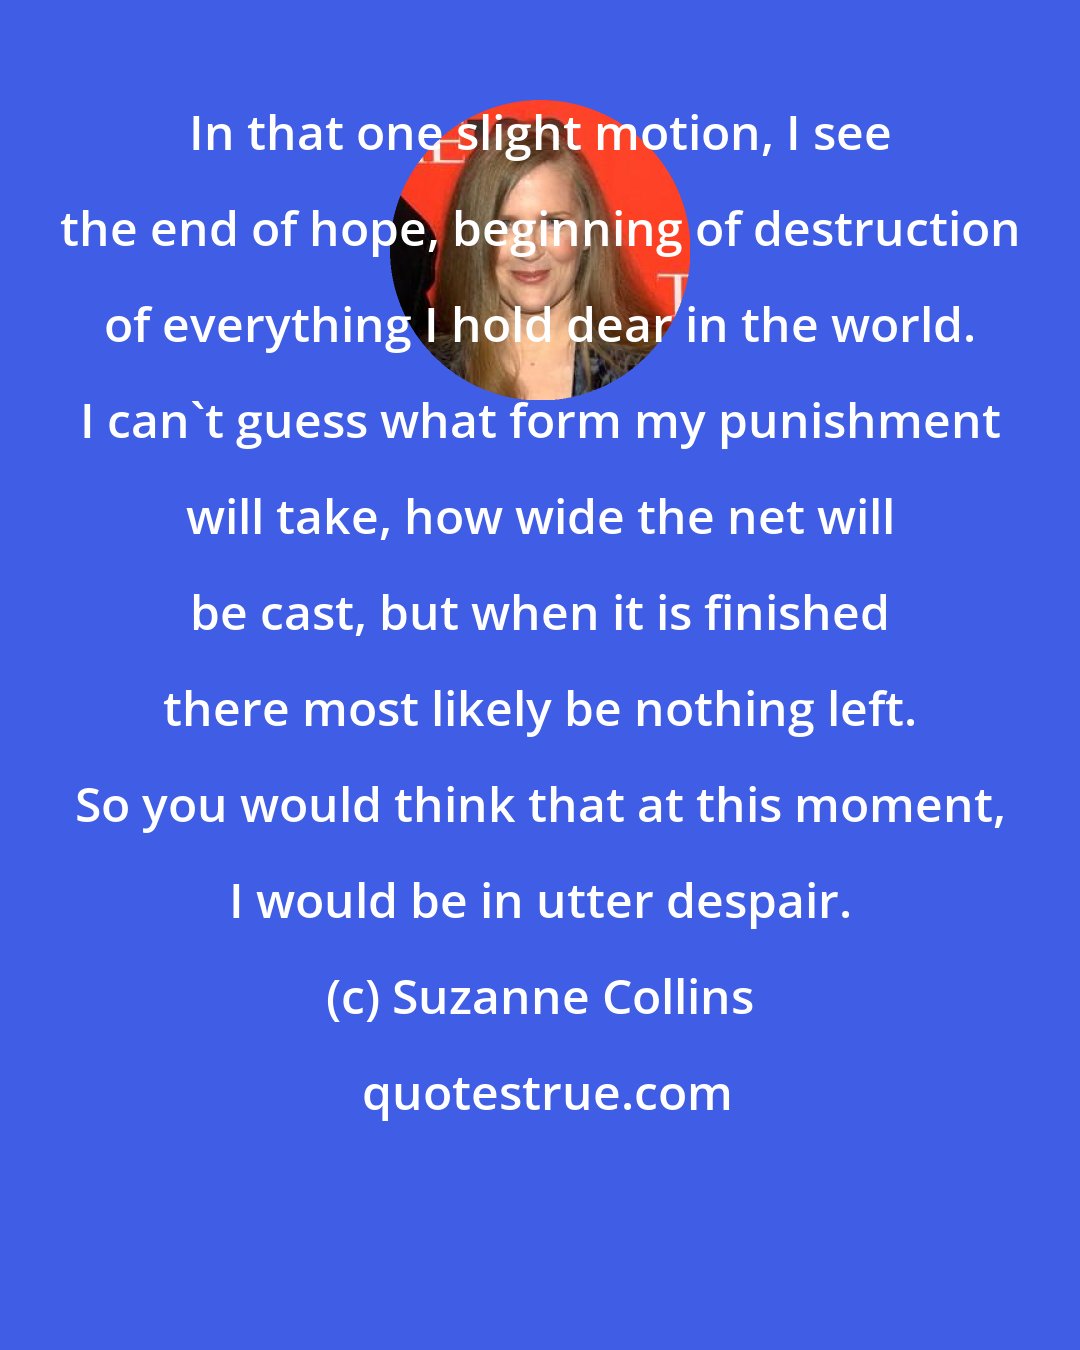 Suzanne Collins: In that one slight motion, I see the end of hope, beginning of destruction of everything I hold dear in the world. I can't guess what form my punishment will take, how wide the net will be cast, but when it is finished there most likely be nothing left. So you would think that at this moment, I would be in utter despair.